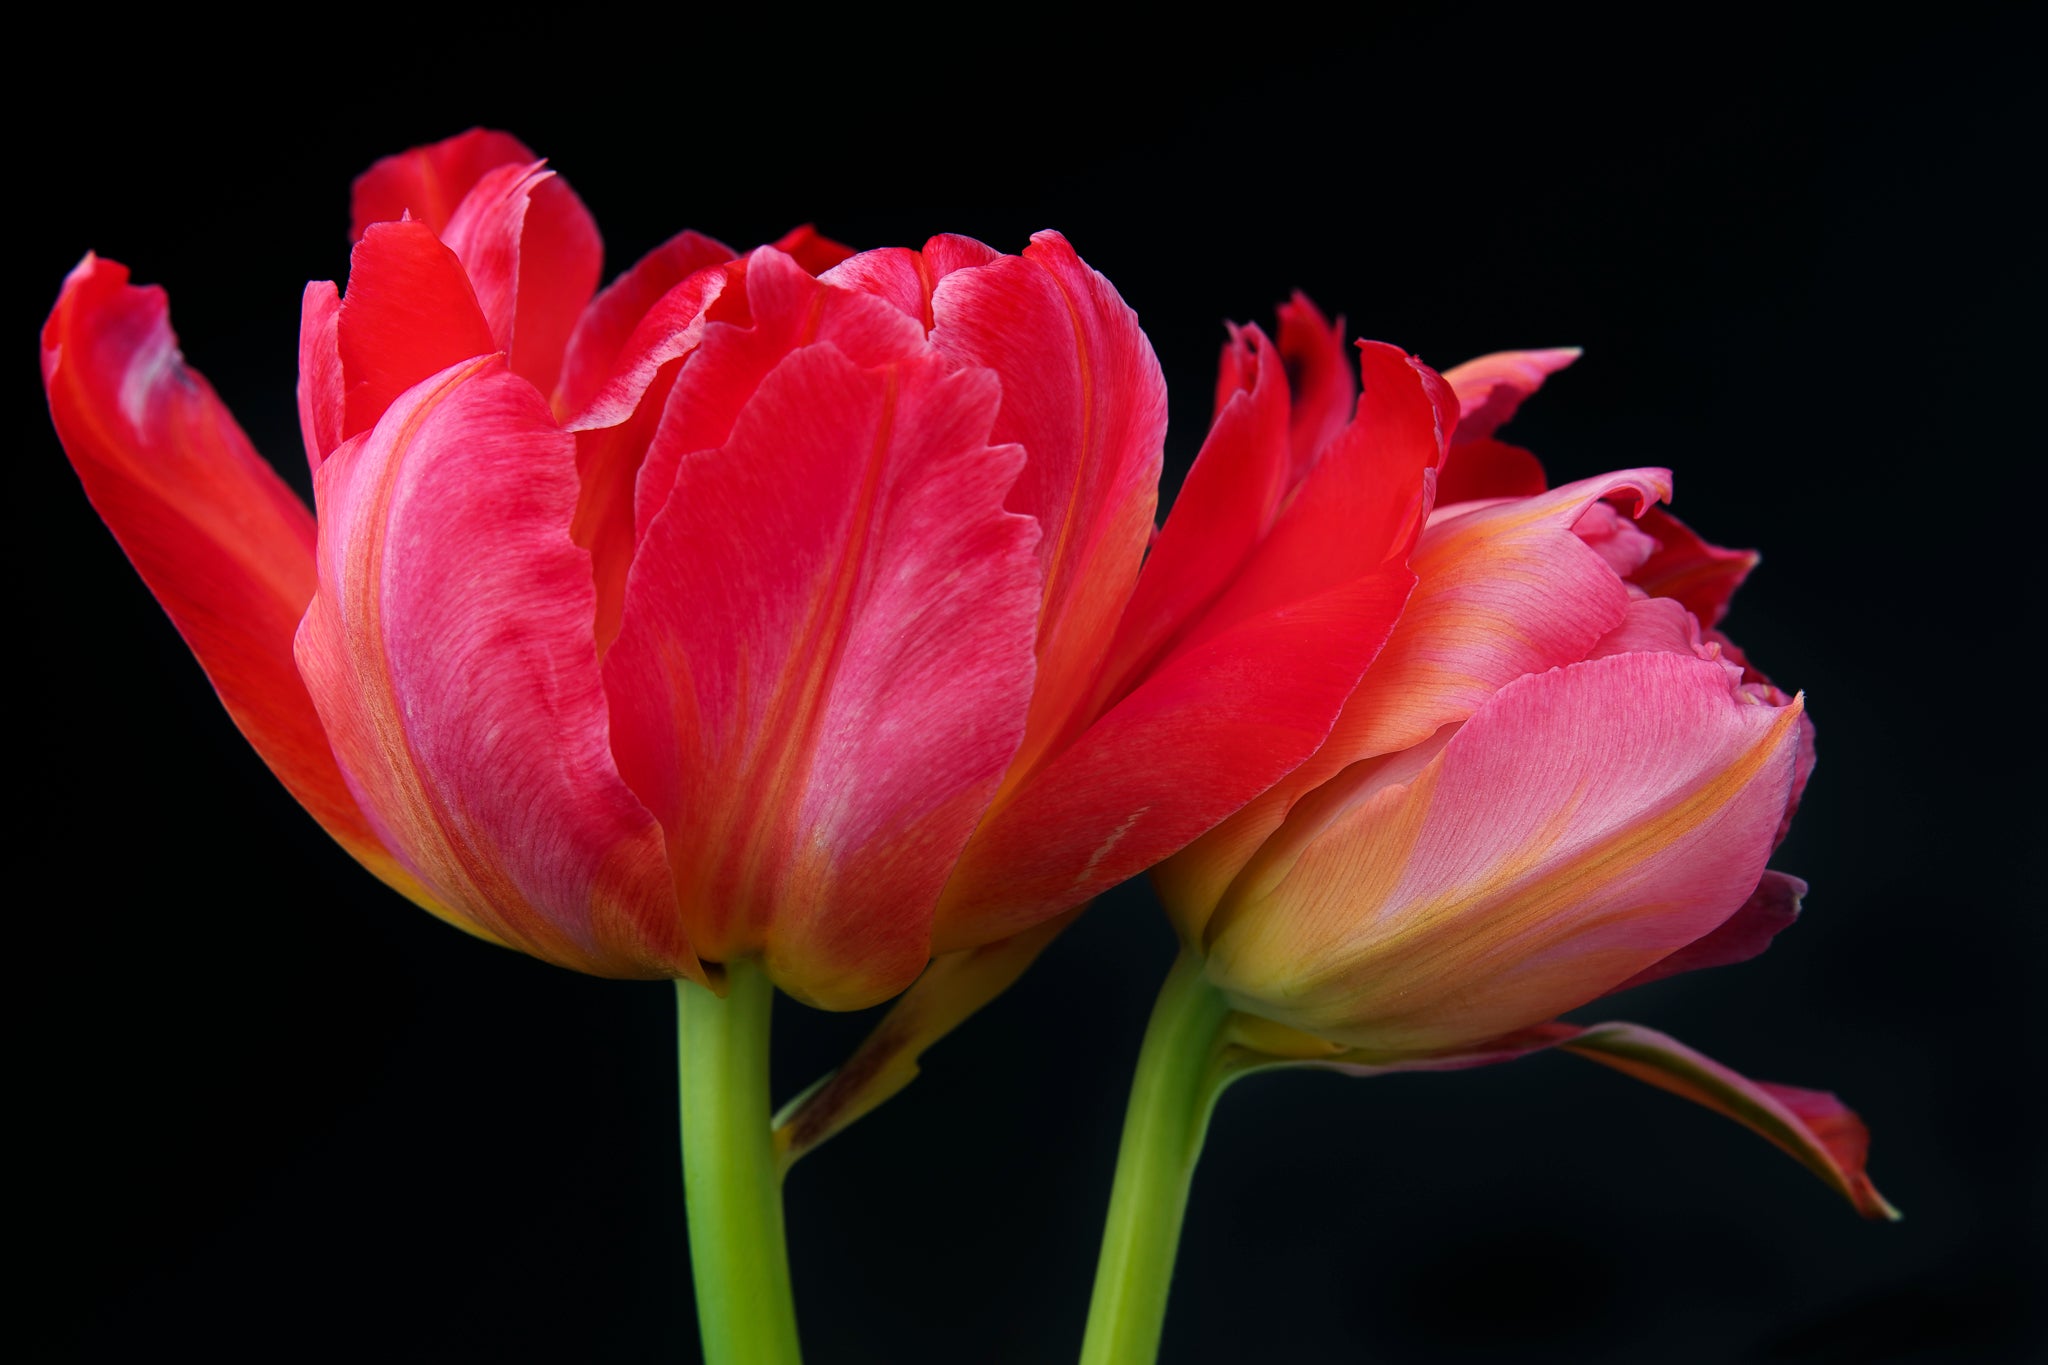 Against a backdrop of darkness, the brilliant colors of parrot tulips stood out like jewels in the night. This beautiful flower art is available as a framed metal print.